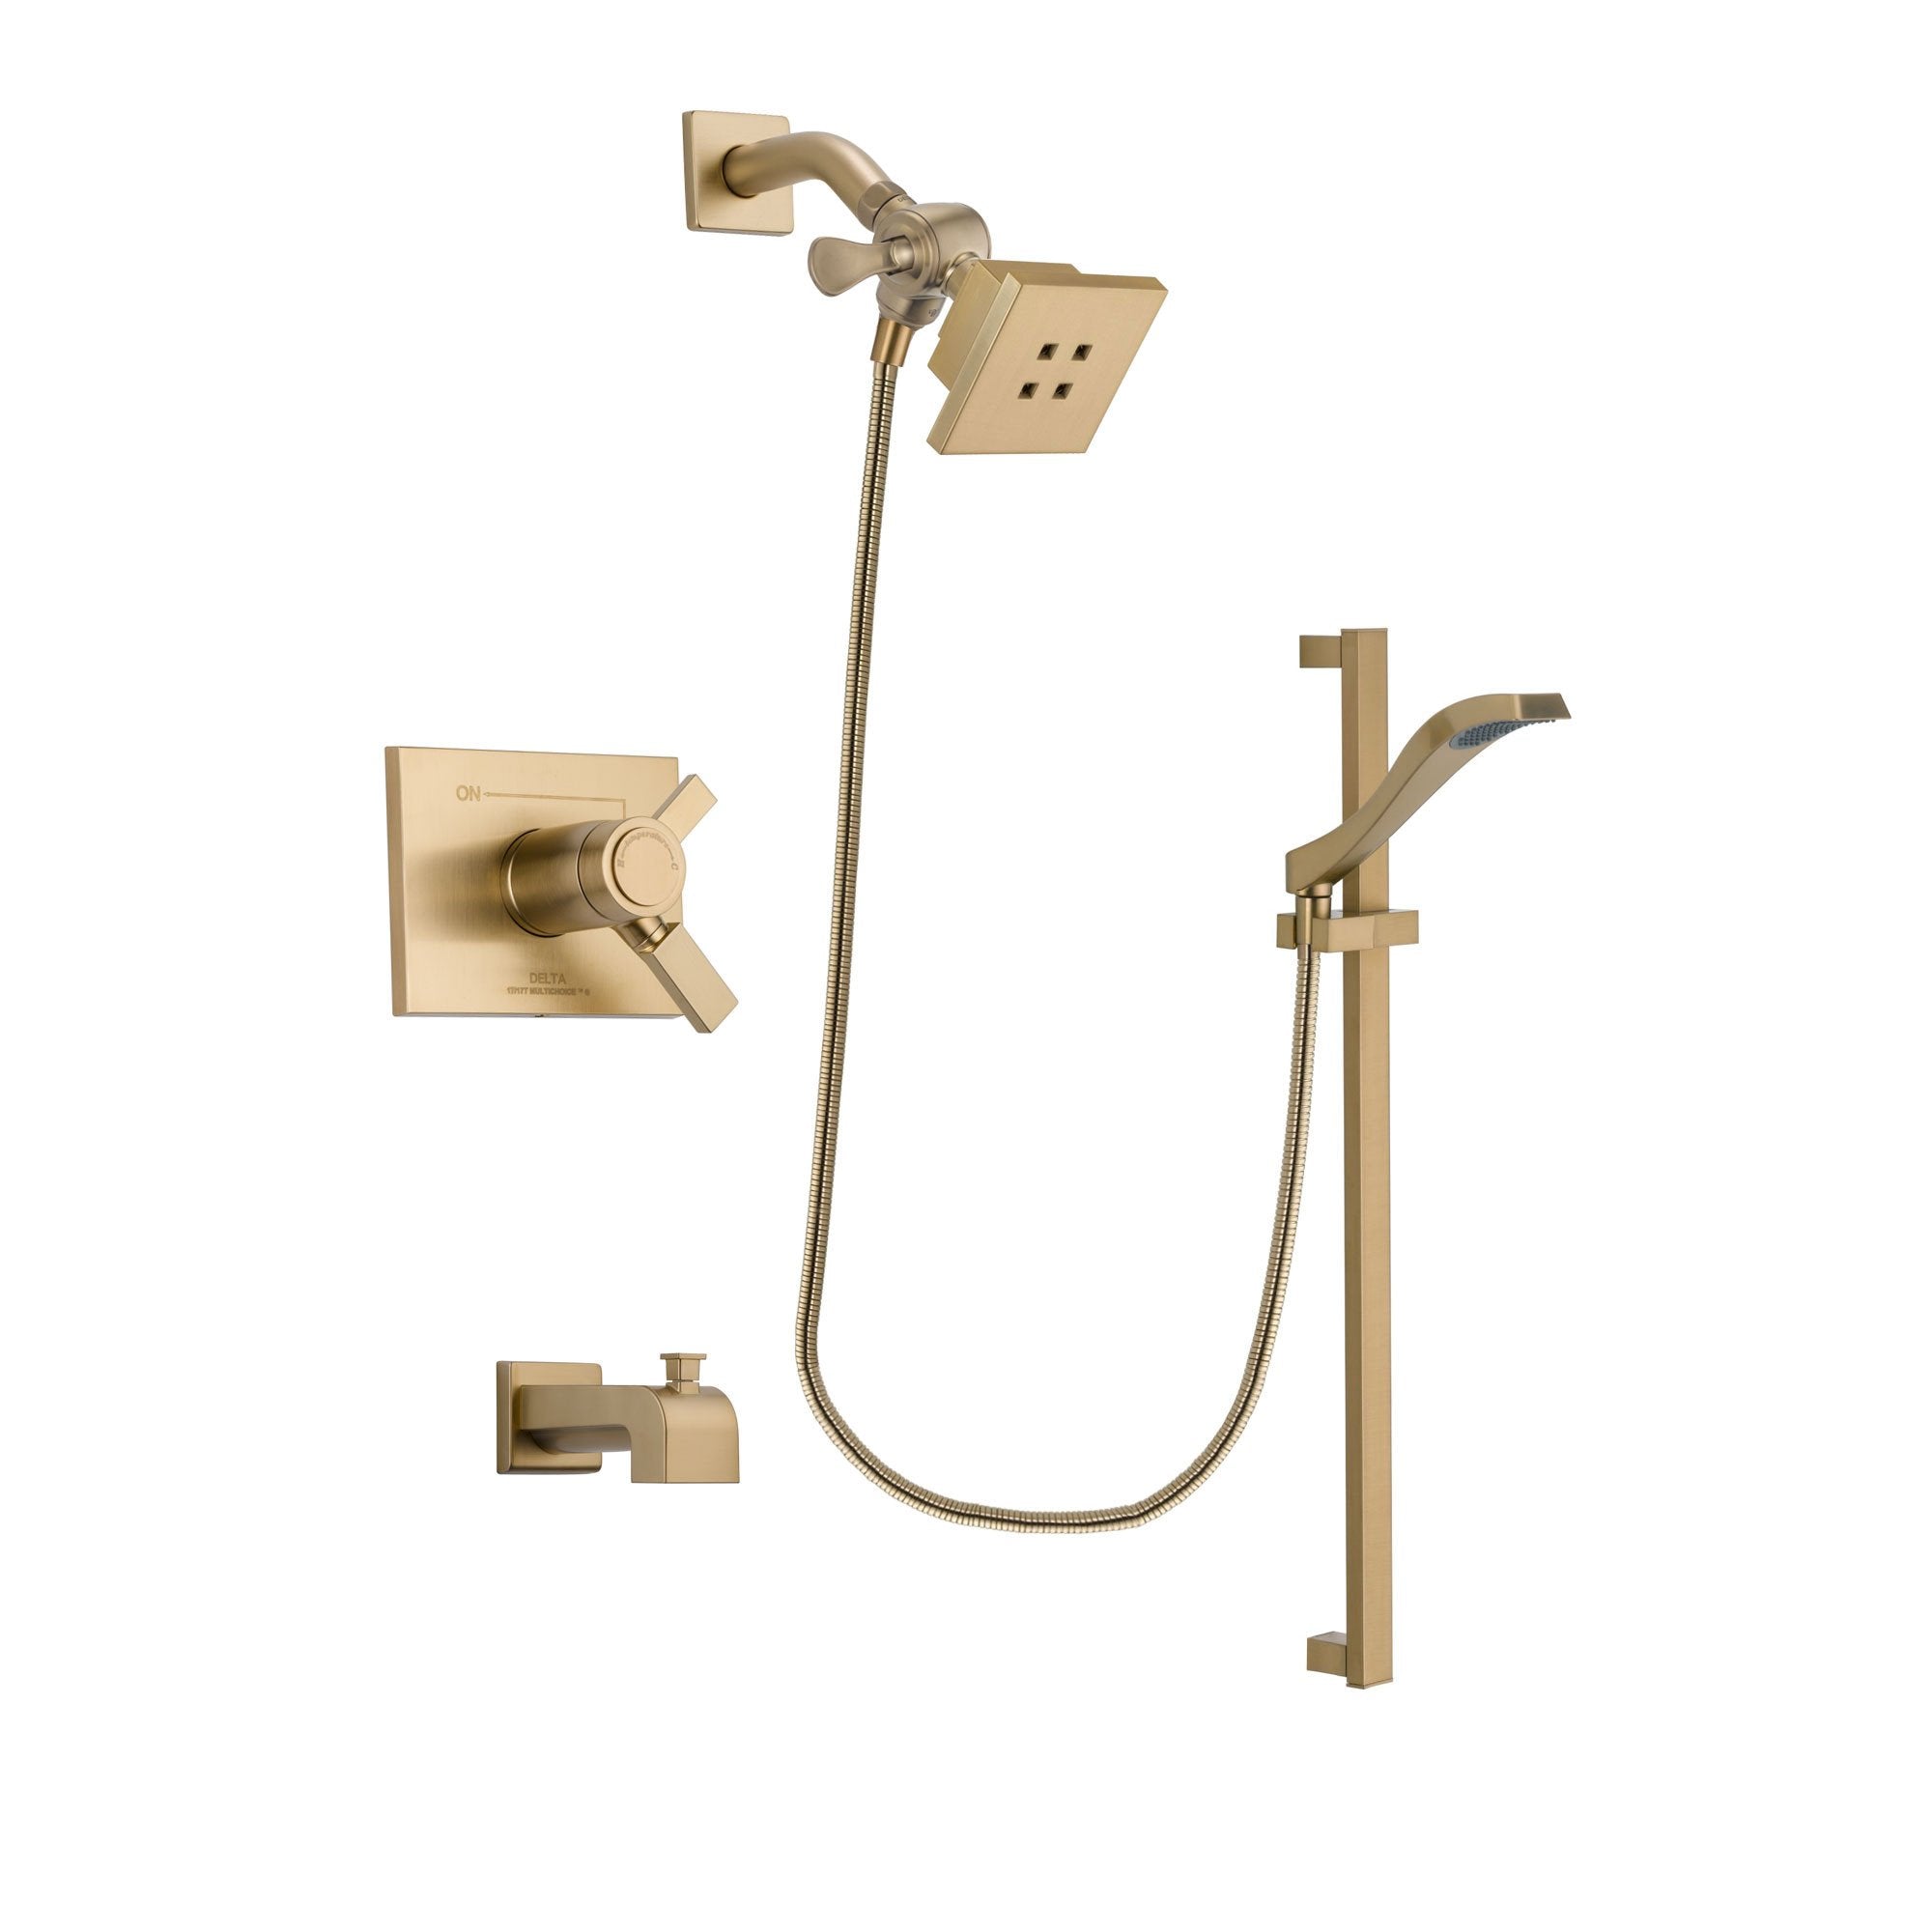 Delta Vero Champagne Bronze Finish Thermostatic Tub and Shower Faucet System Package with Square Showerhead and Modern Handheld Shower Spray with Slide Bar Includes Rough-in Valve and Tub Spout DSP3911V